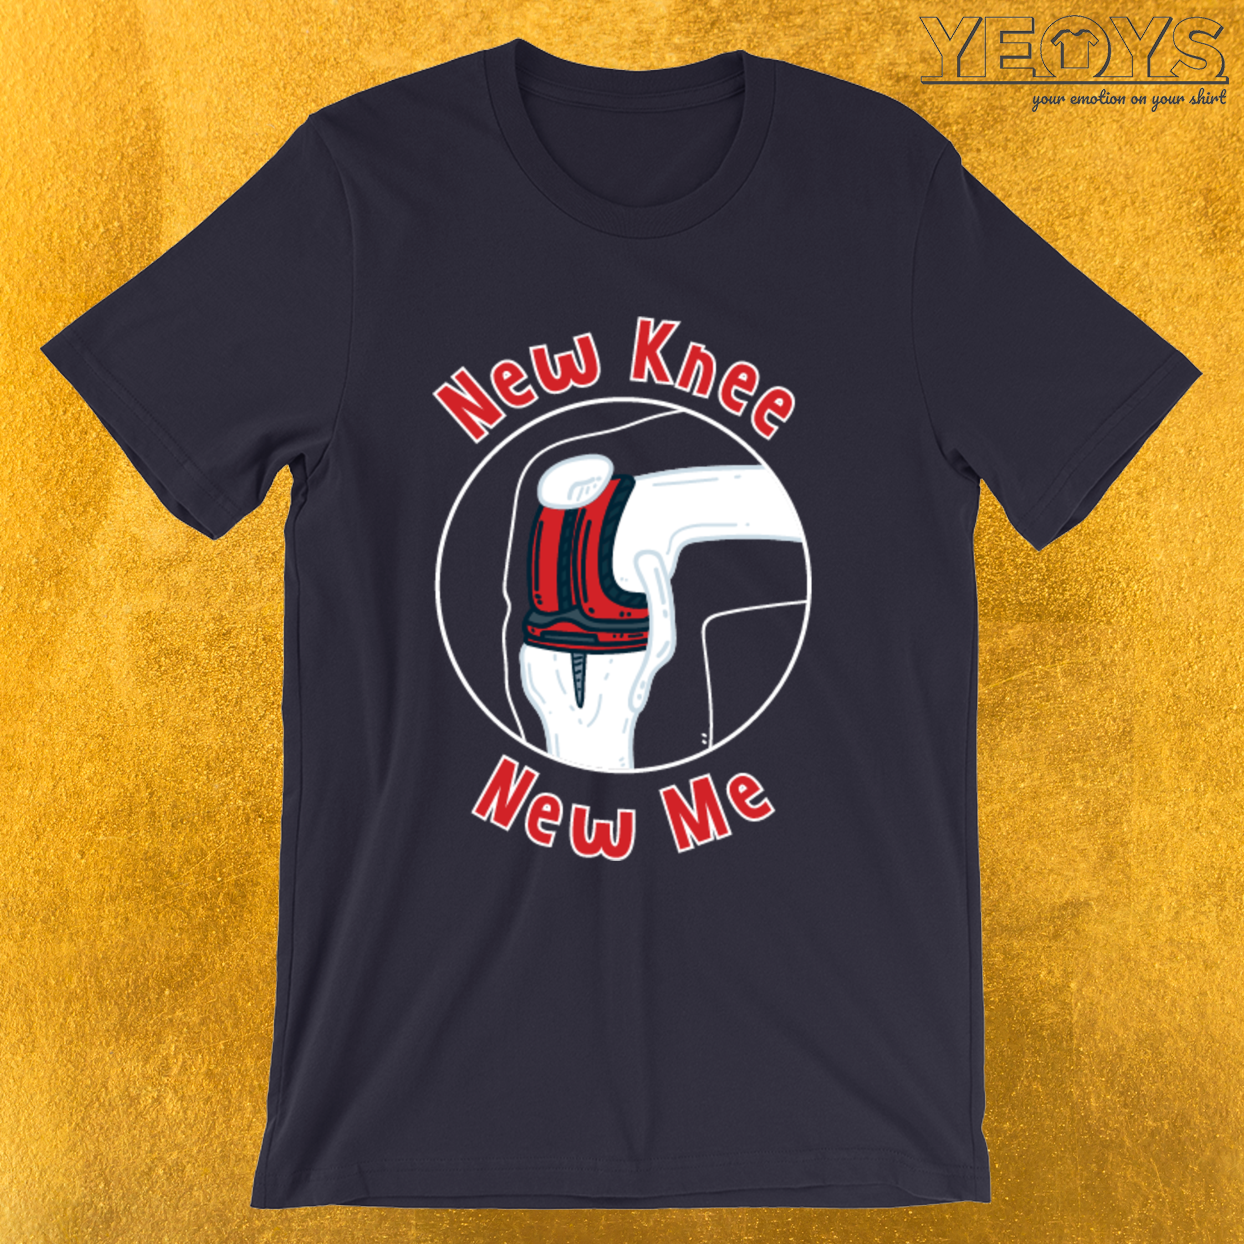 New Knee New Me – Knee Replacement Tee